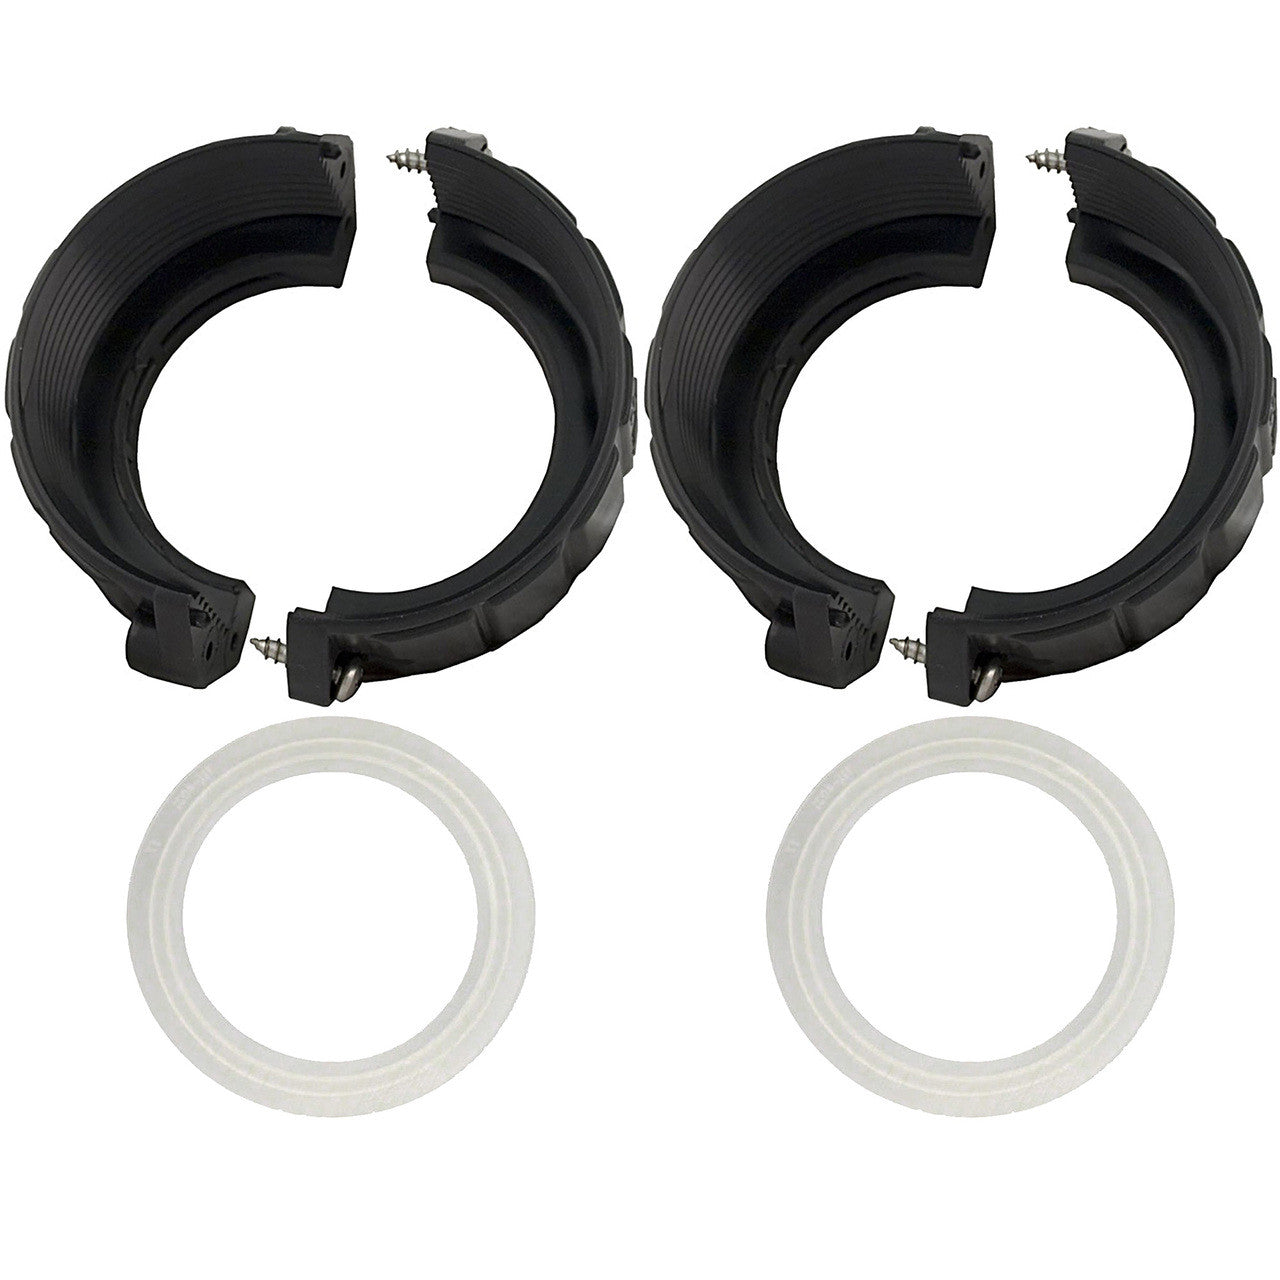 Phelps Style 8500 - U.S. Industrial Standard, O-Ring Kits